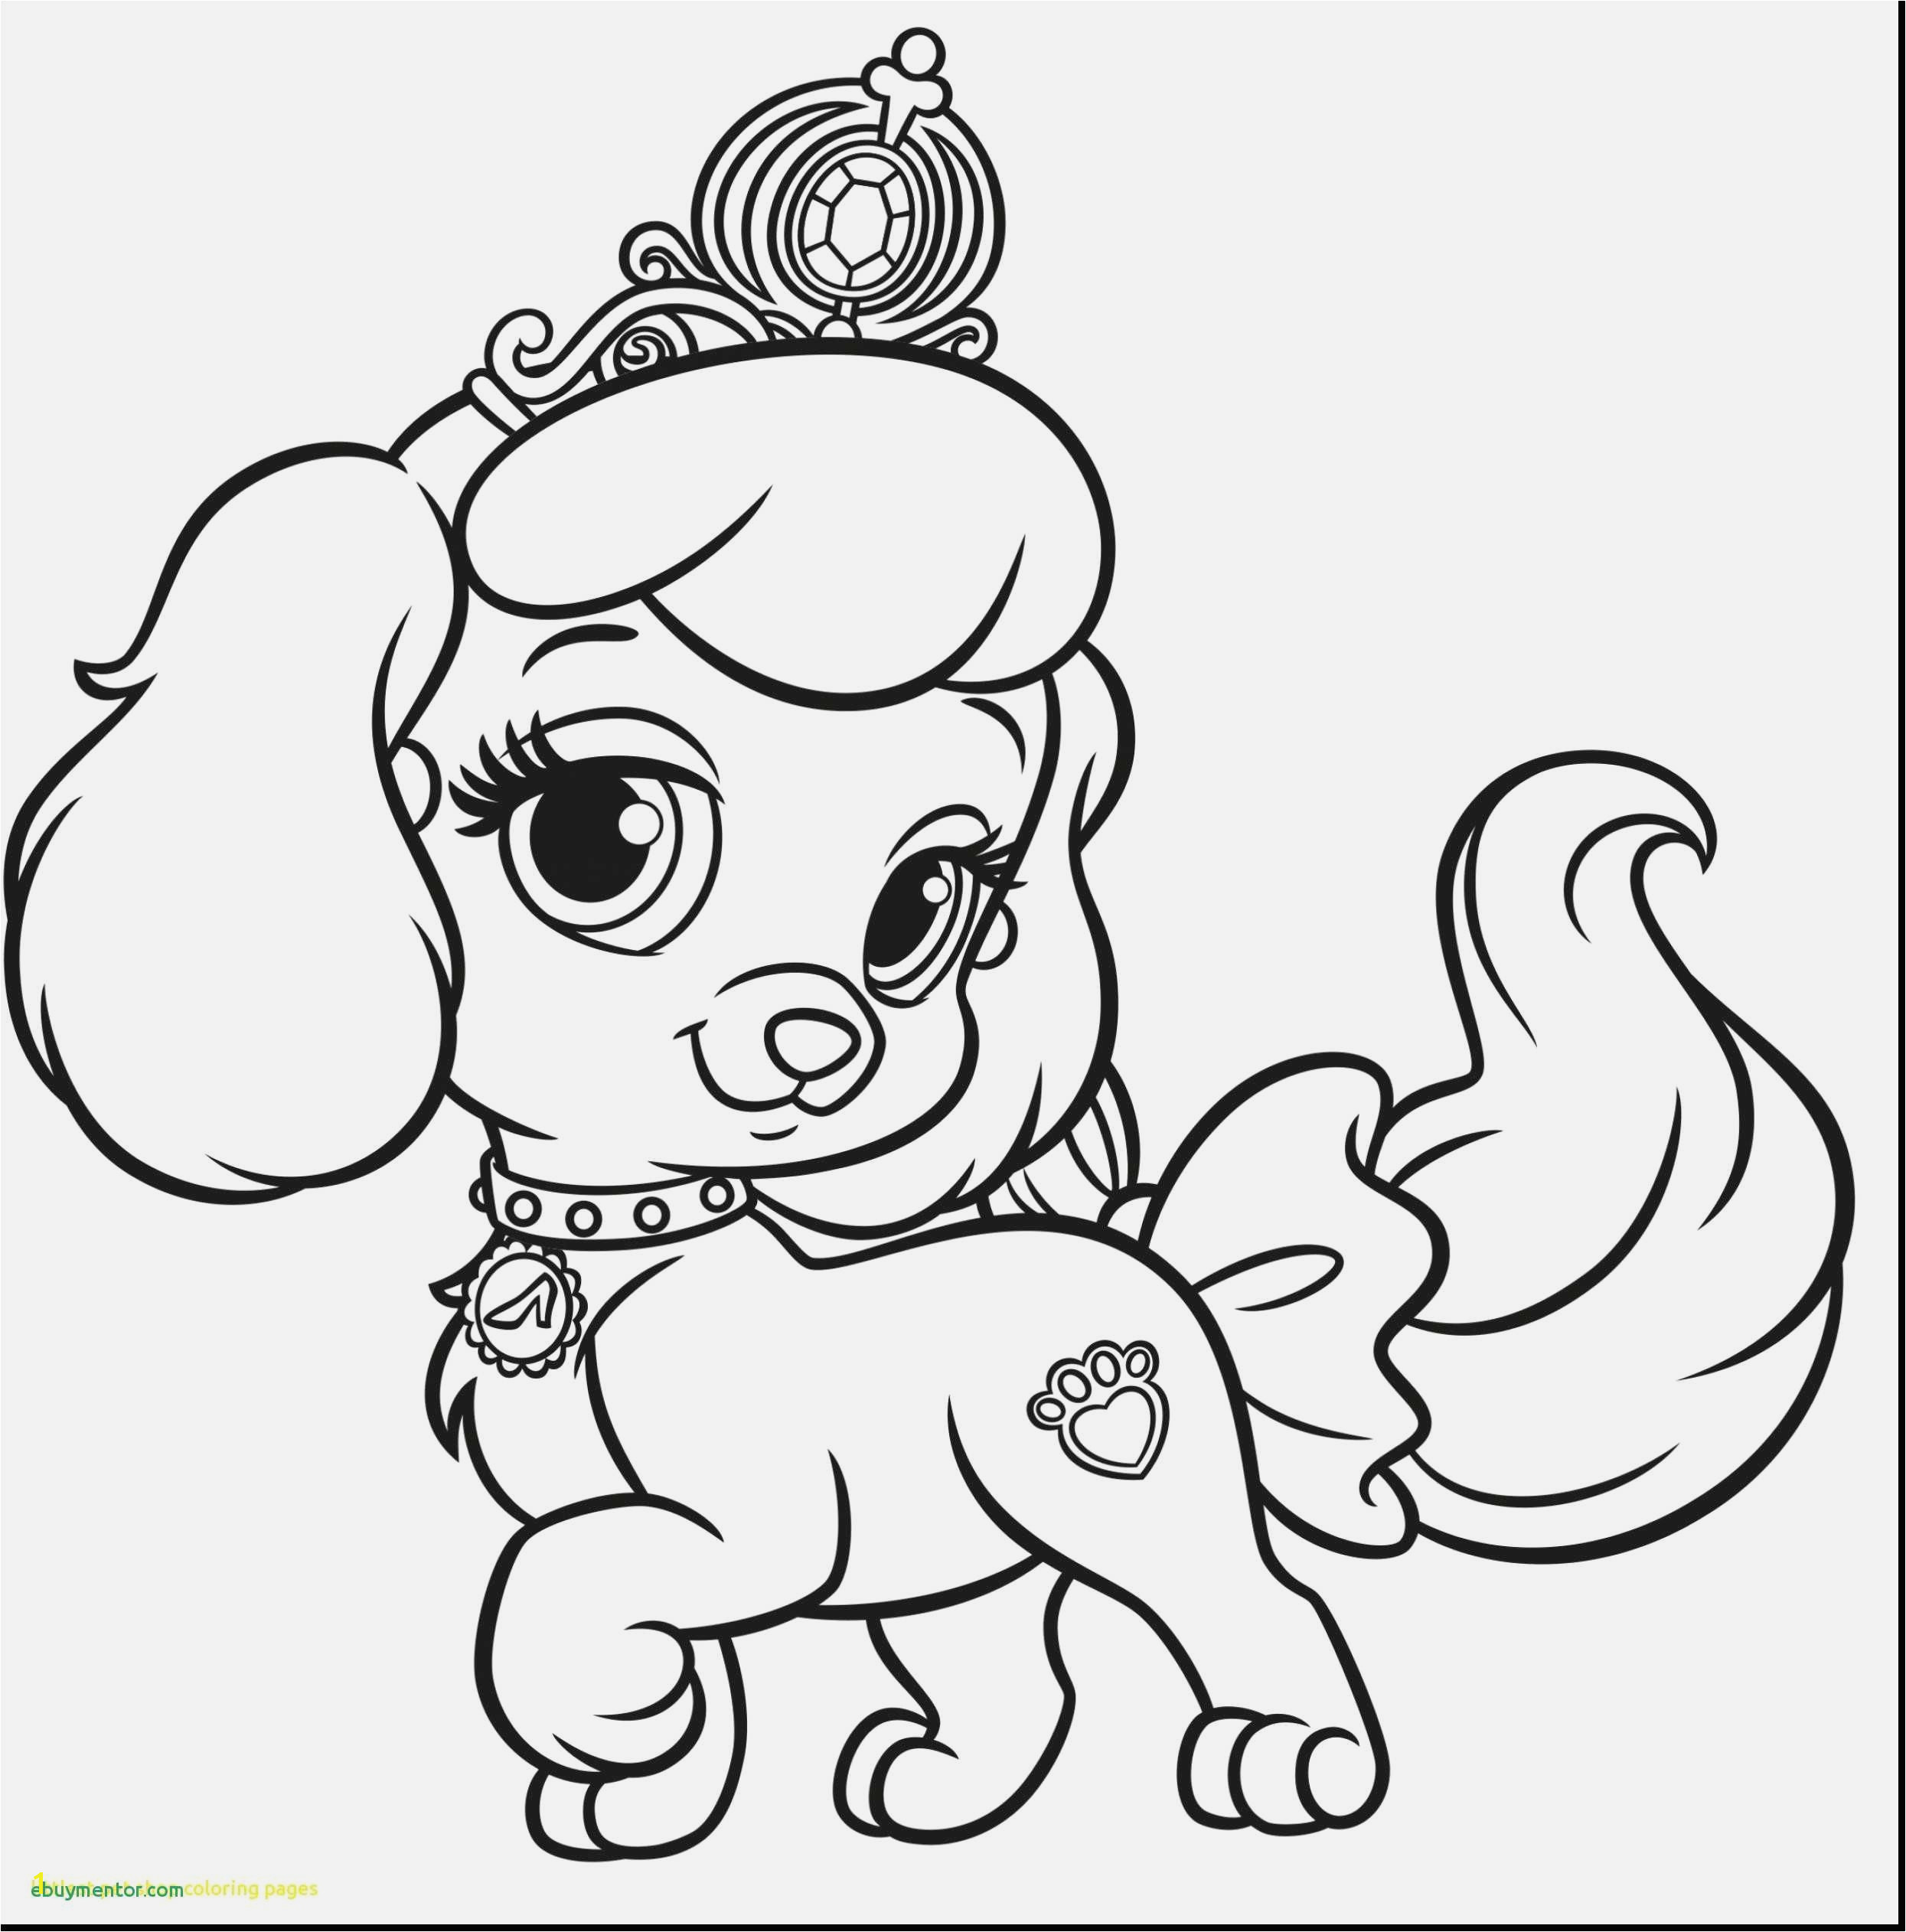 Coloring Pages Of Littlest Pet Shop Animals Pretty Coloring Pages Printable Preschool Coloring Pages Fresh Fall